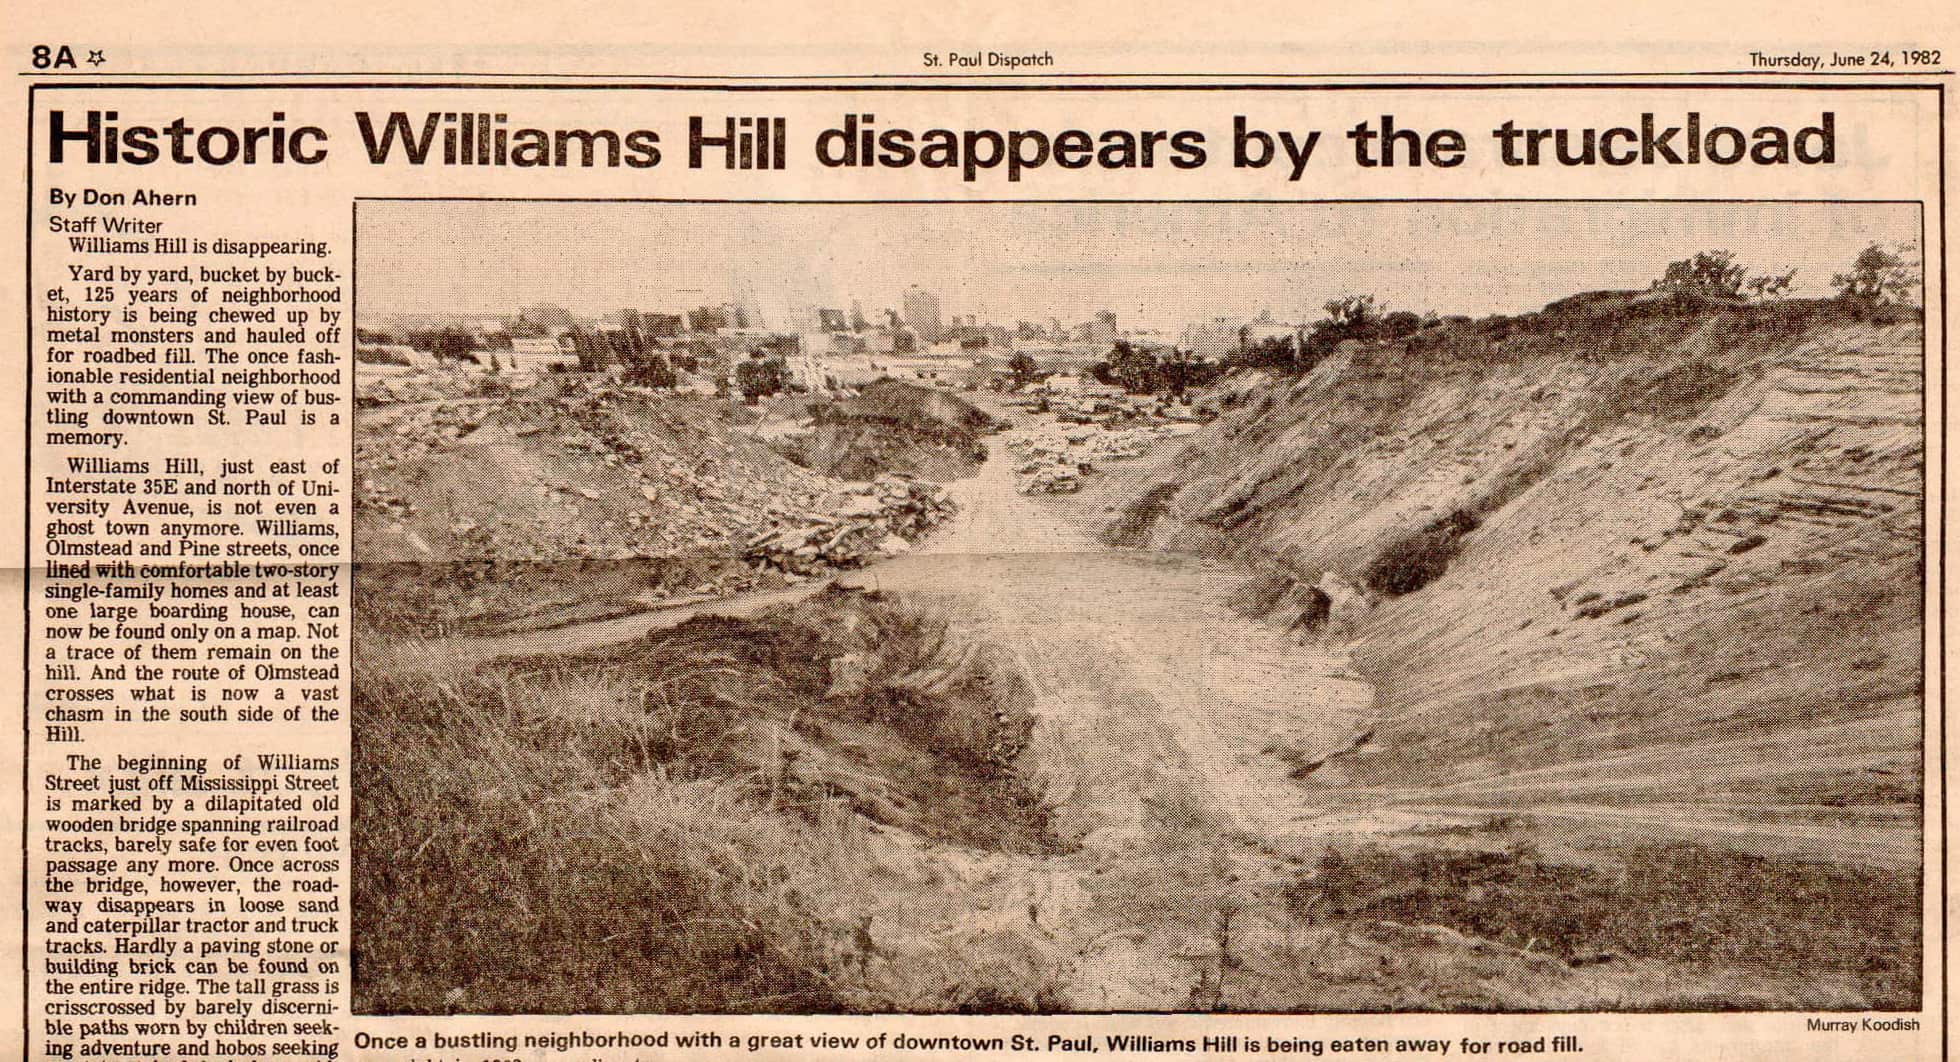 This article in the June 24, 1982 Saint Paul Dispatch reported on the final demise and history of Williams Hill. Courtesy Gary Horn